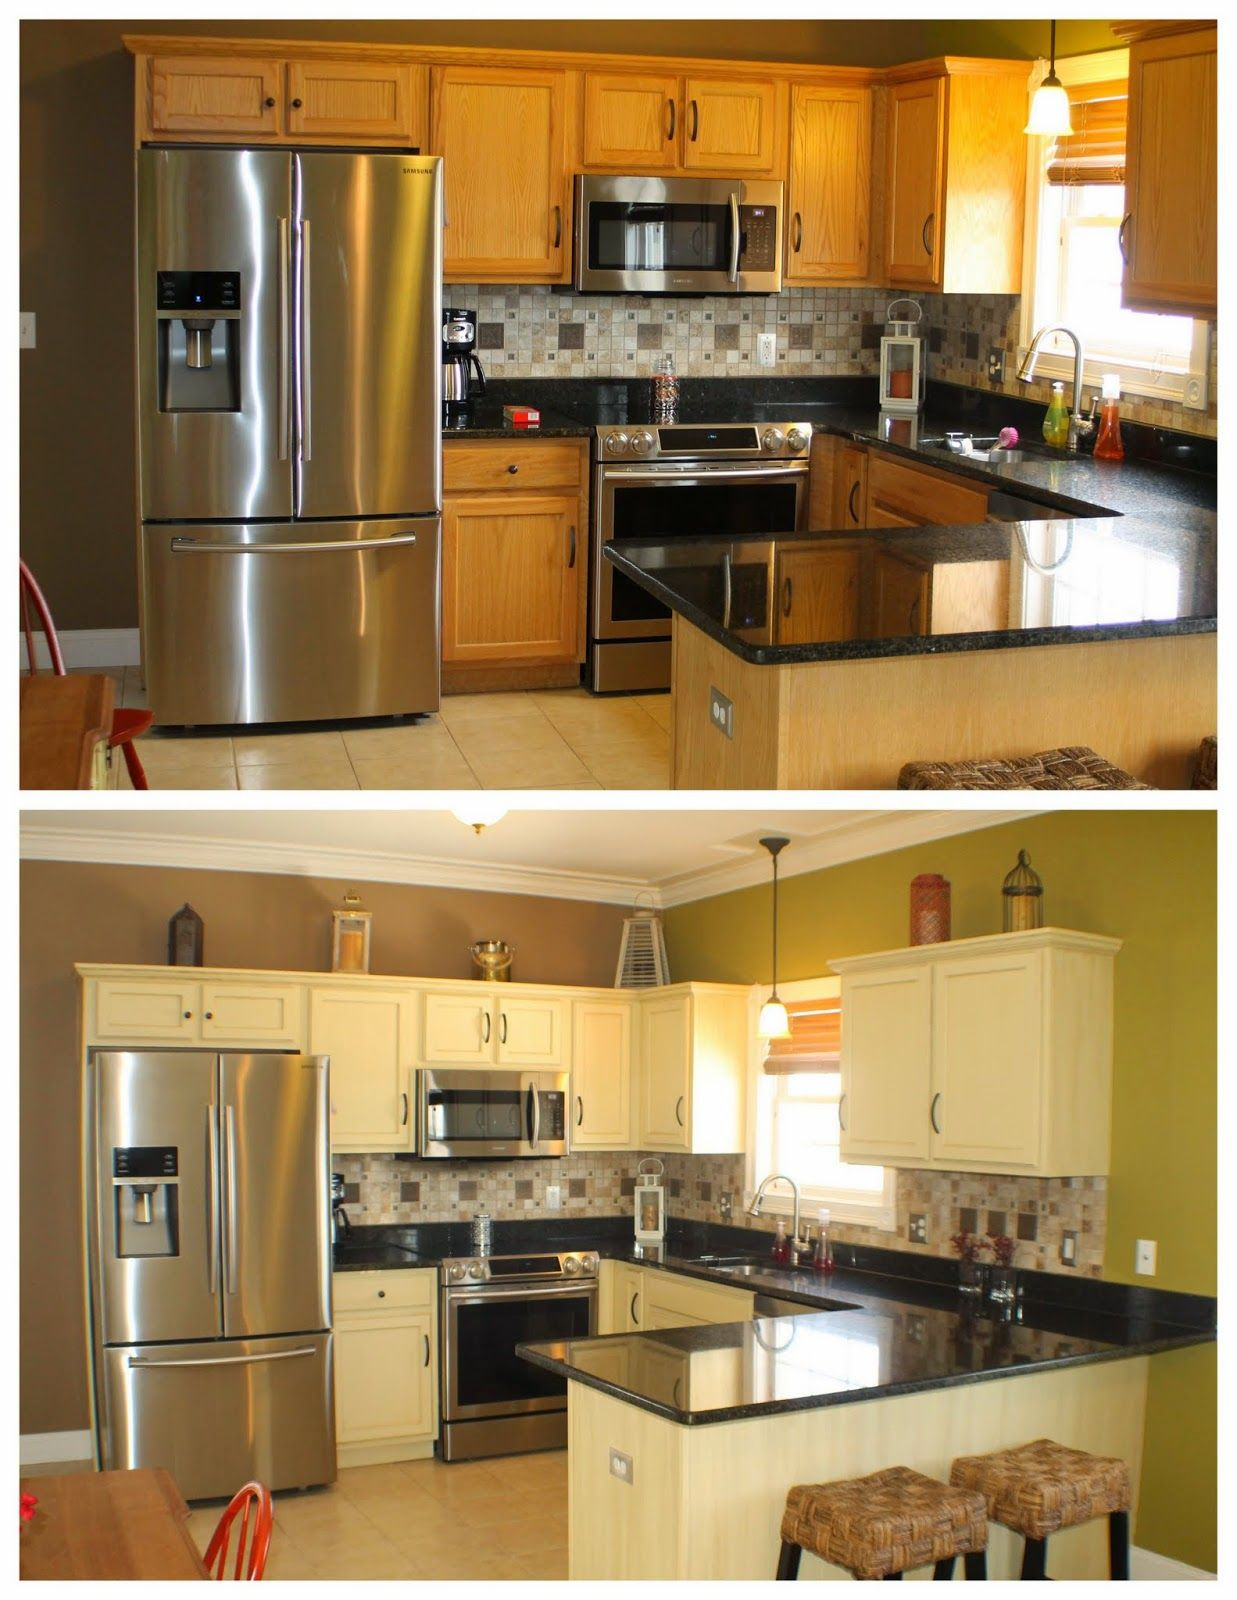 Chalk Paint Kitchen Cabinets Before And After
 Before and After Annie Sloan ASCP Cream before and